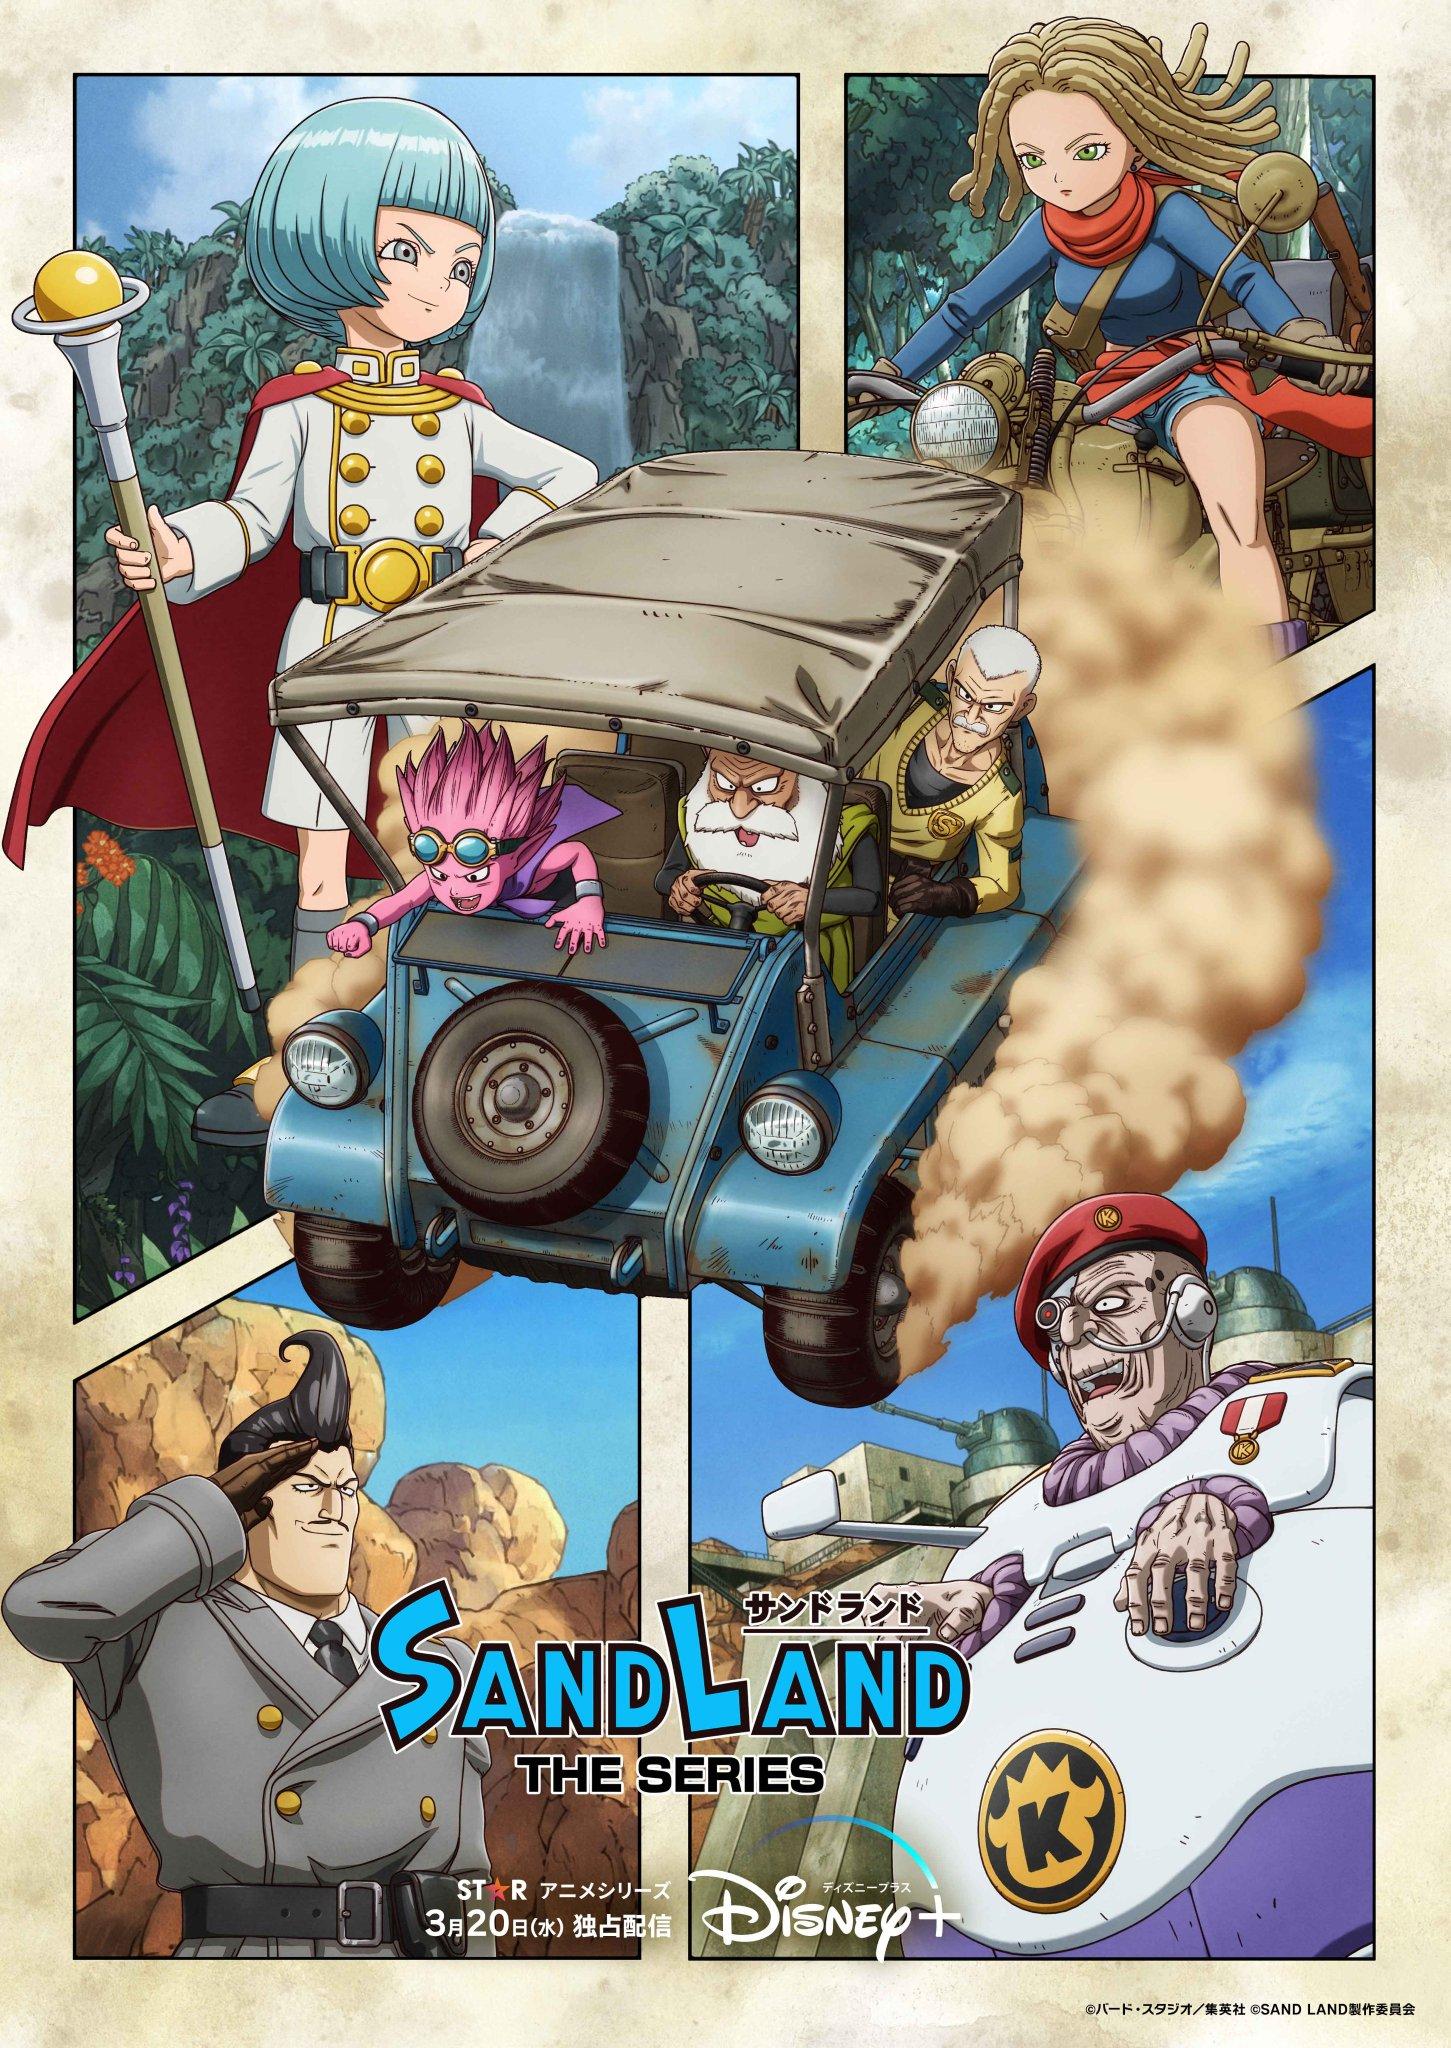 Sand Land: The Series - March 20 - Streaming on Disney+ HotstarBased on the manga by the late Akira Toriyama, 